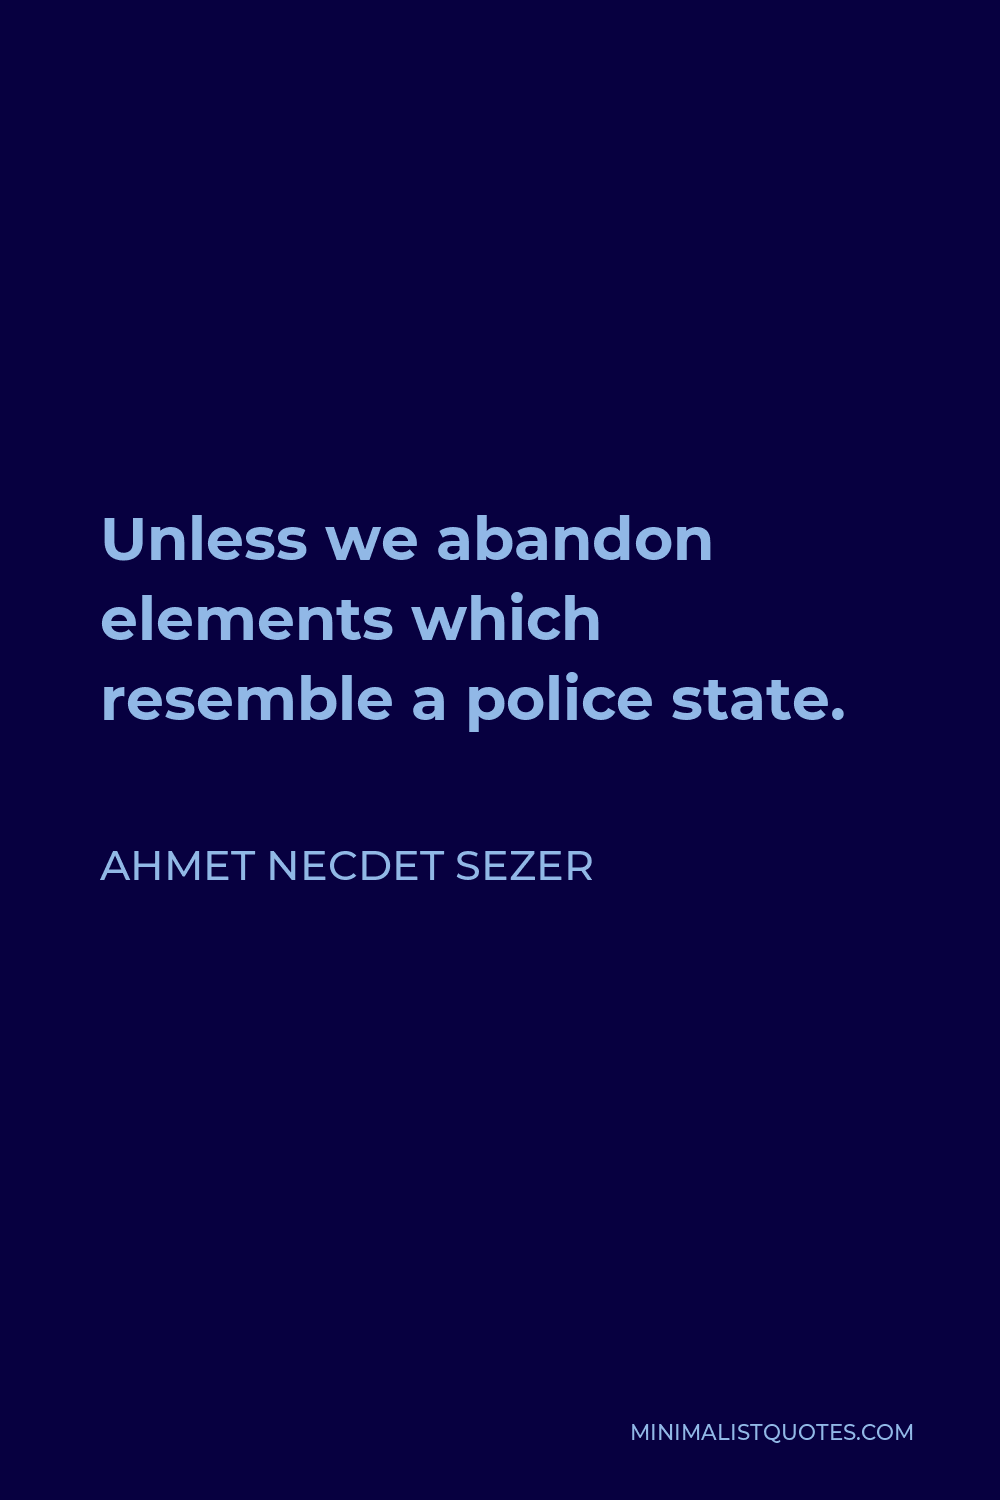 Ahmet Necdet Sezer Quote - Unless we abandon elements which resemble a police state.